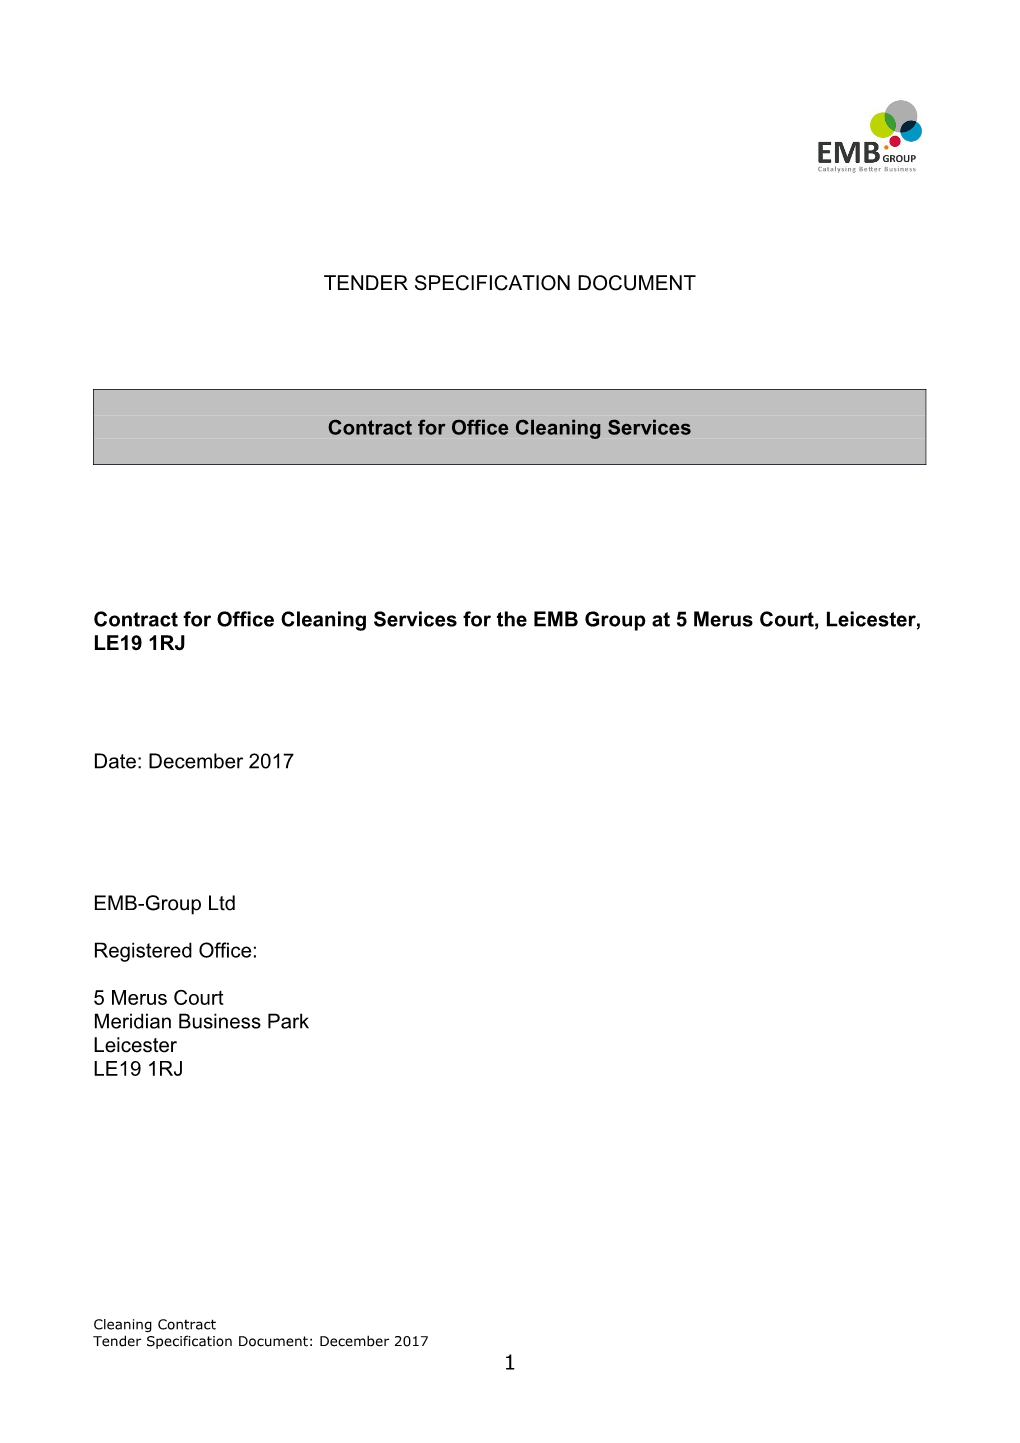 Tender Specification Document